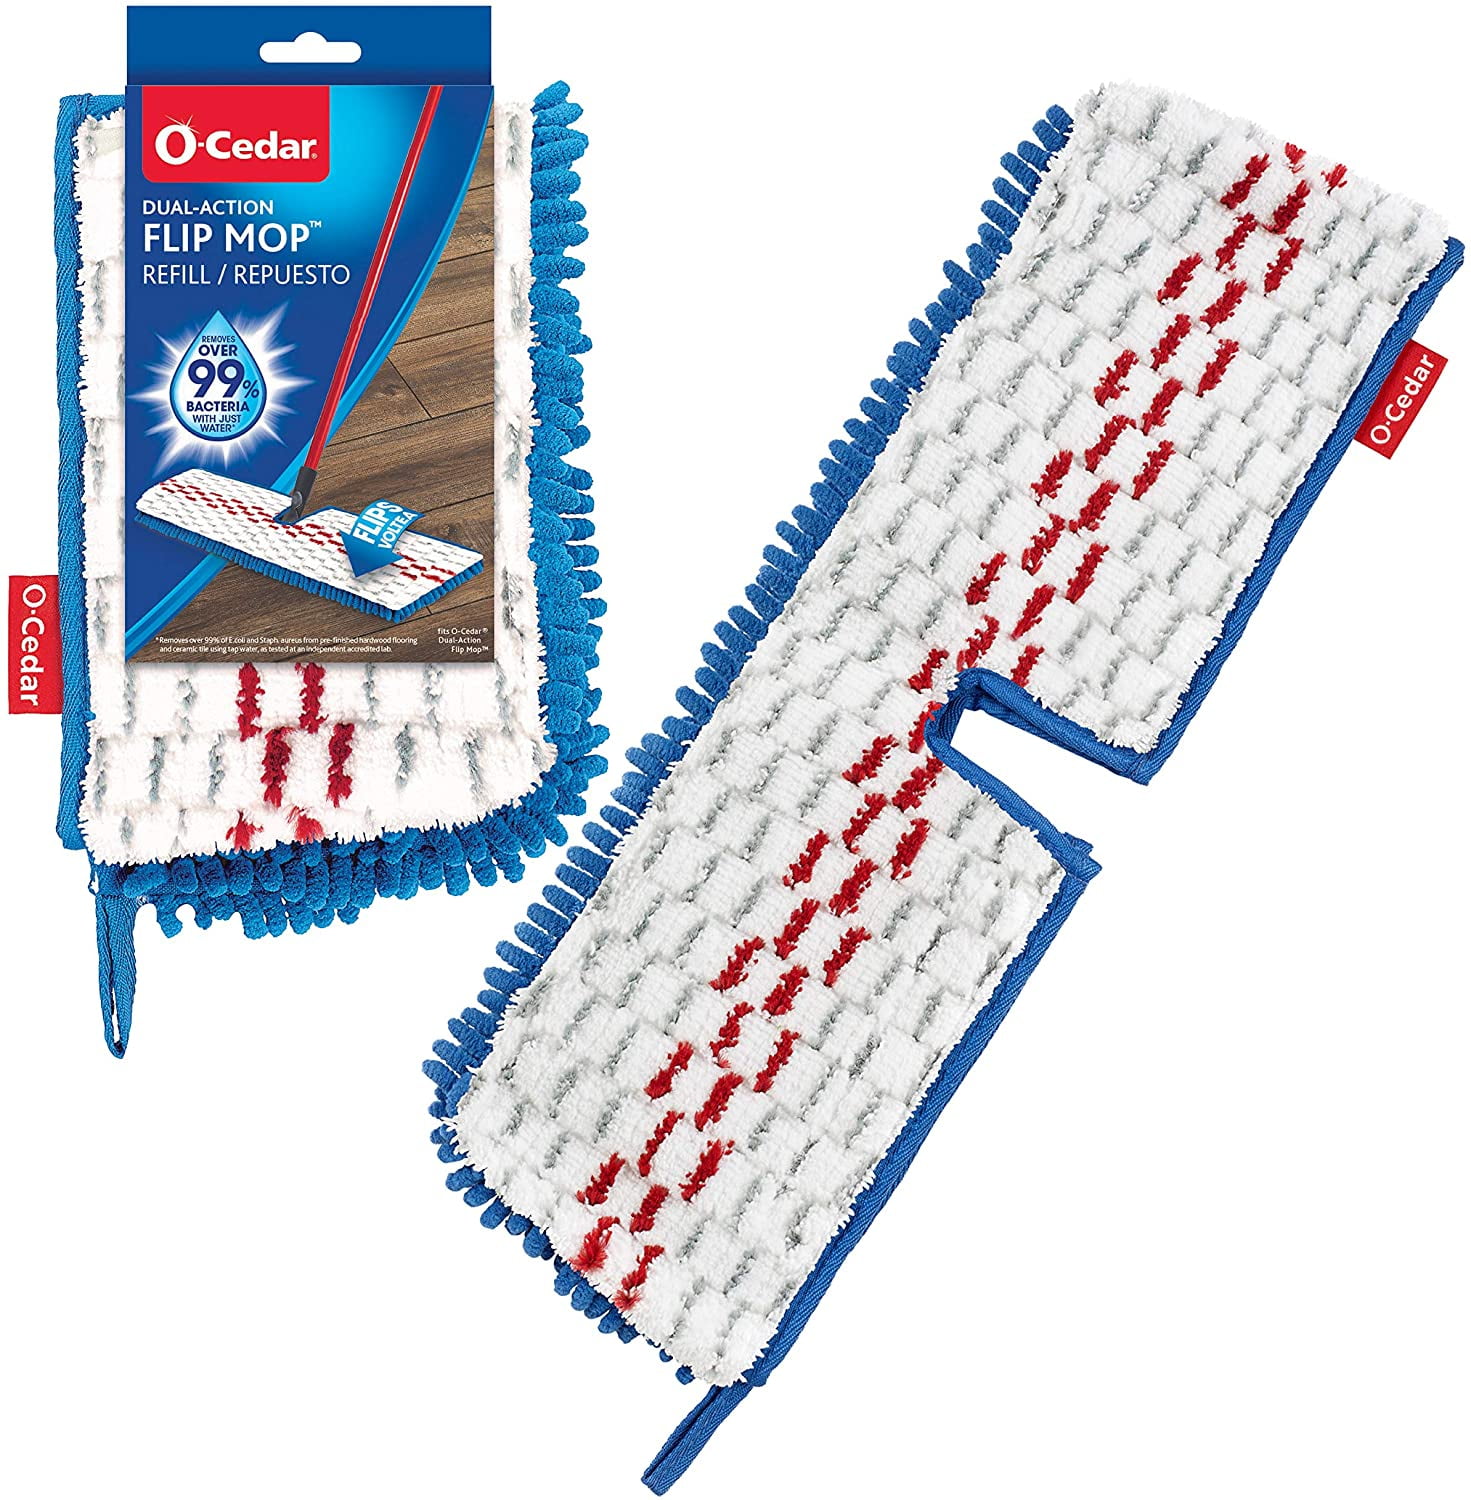 Pad Mop cloth For OCedar Dual-Action Flip Mop Cleaning Elements Set Suitable 